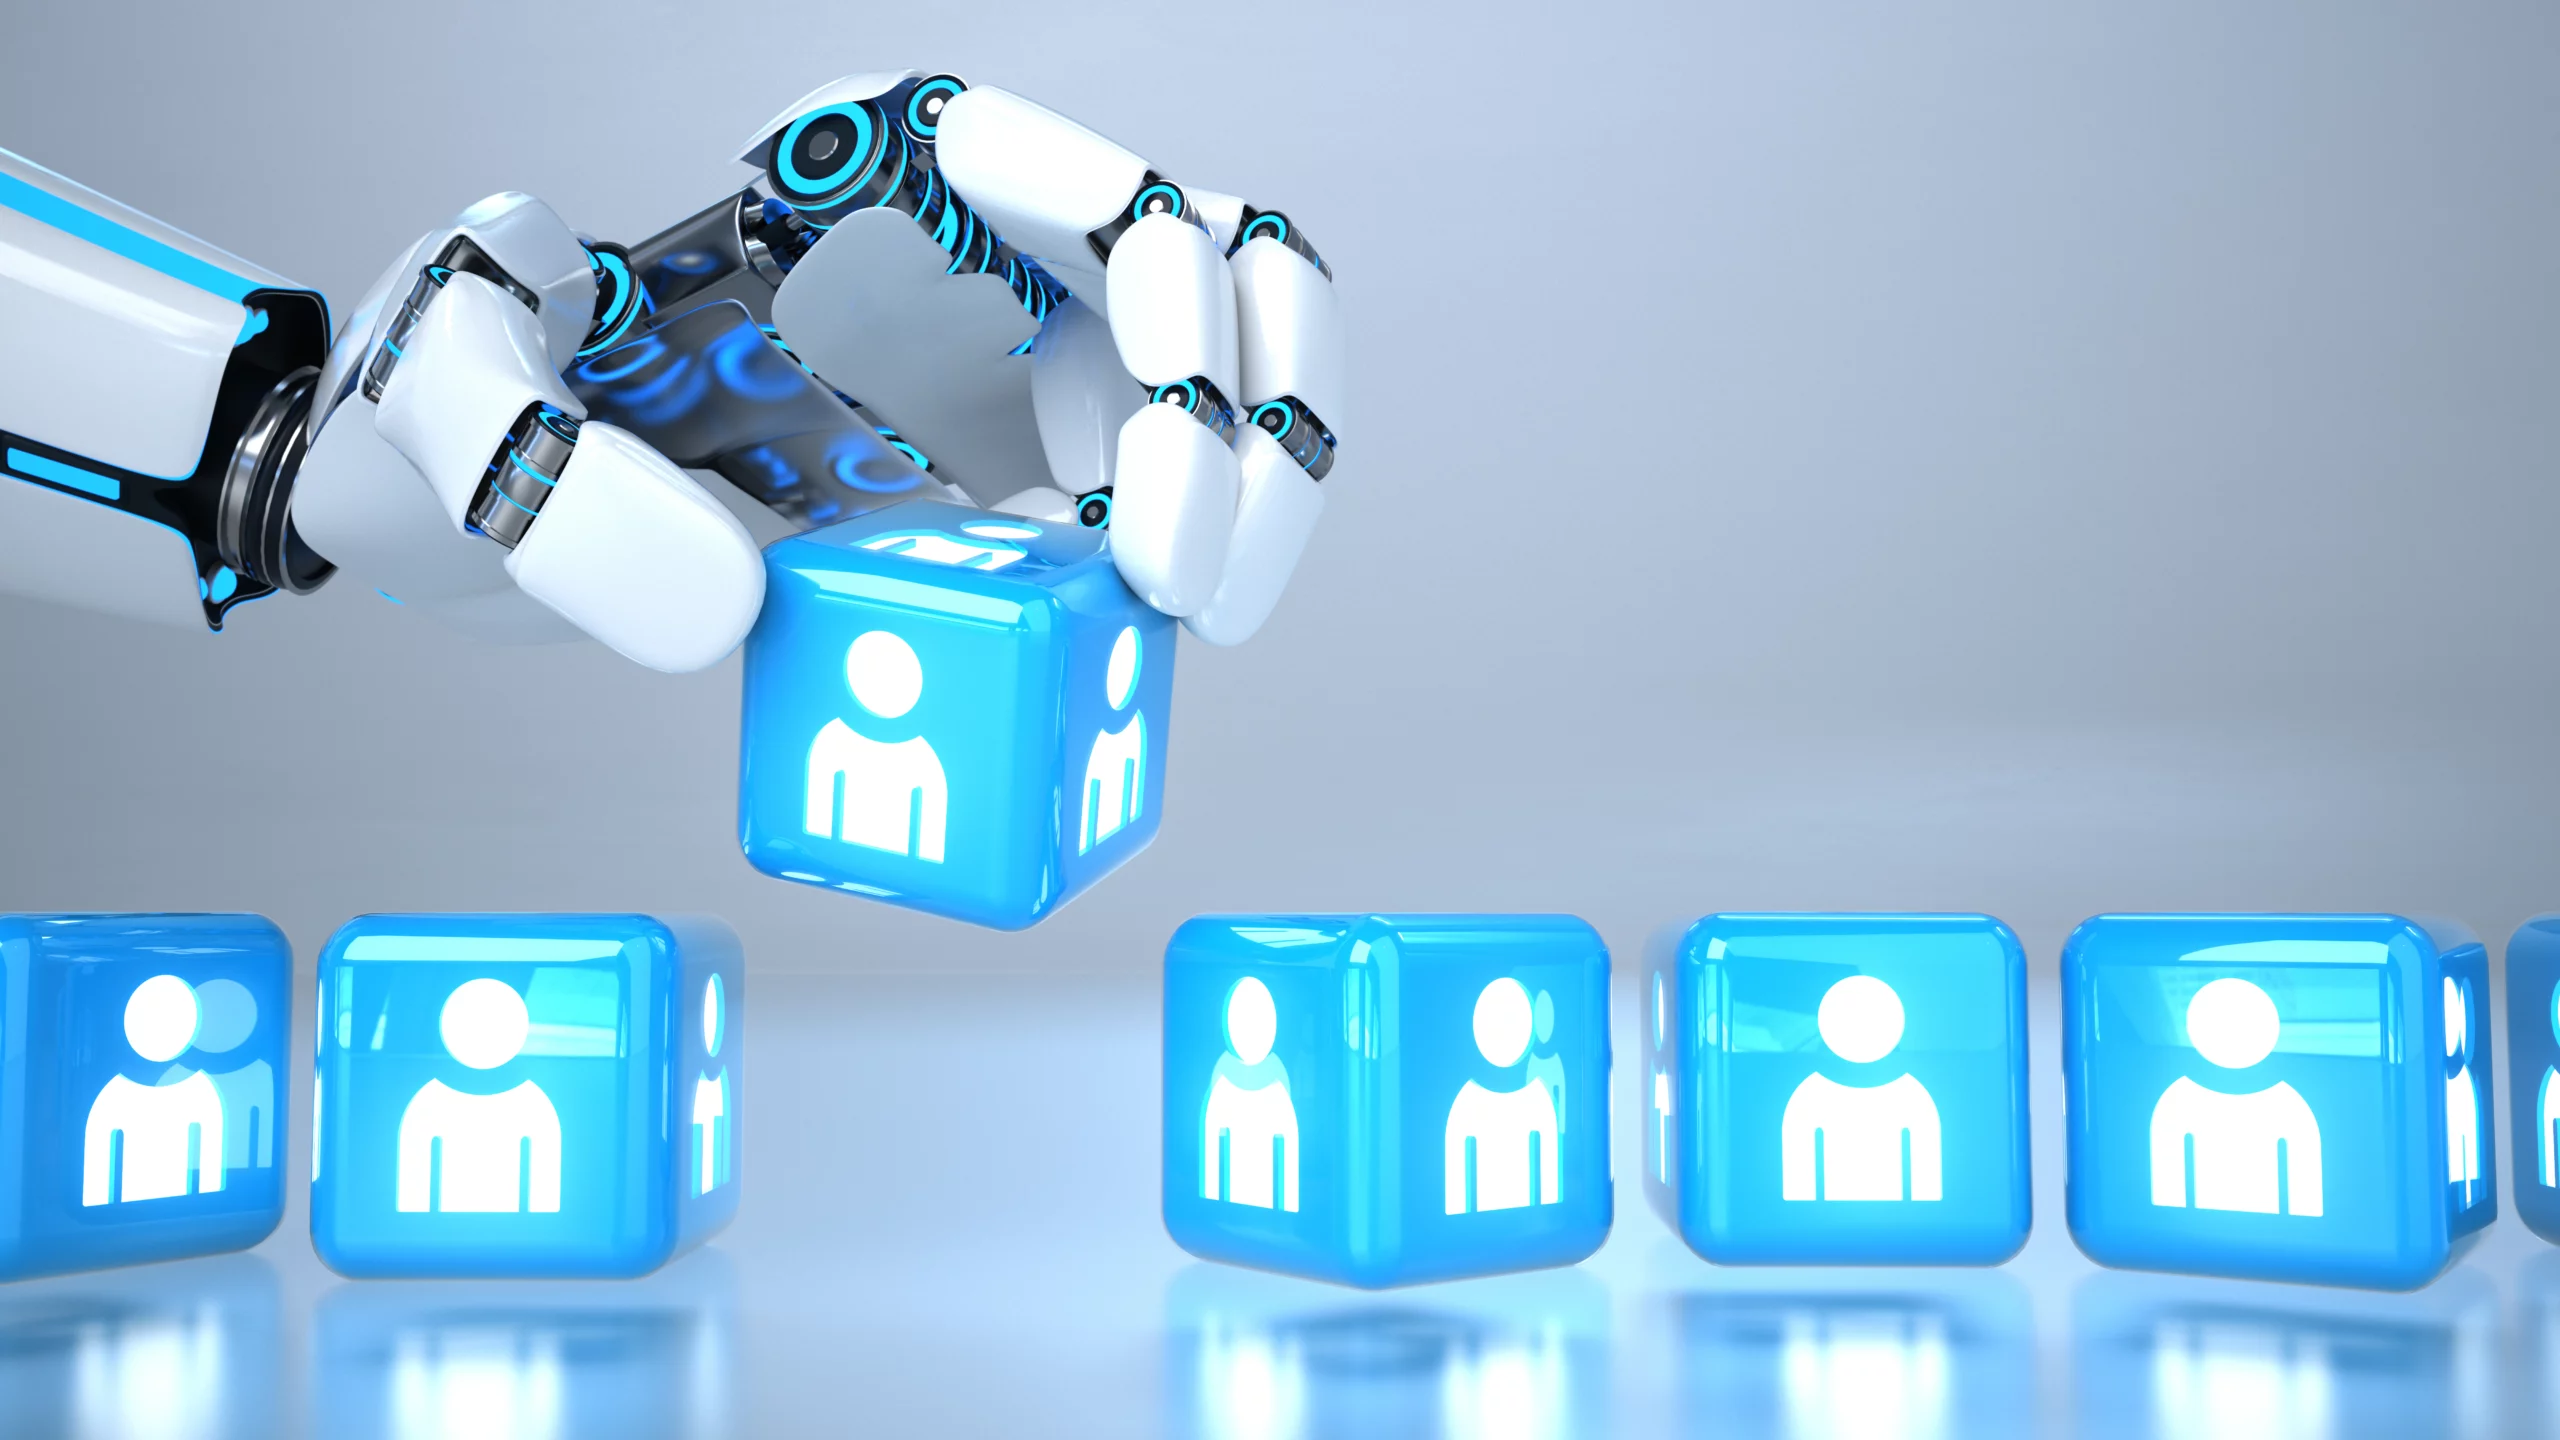 How can artificial intelligence be used to help with recruitment and talent selection?